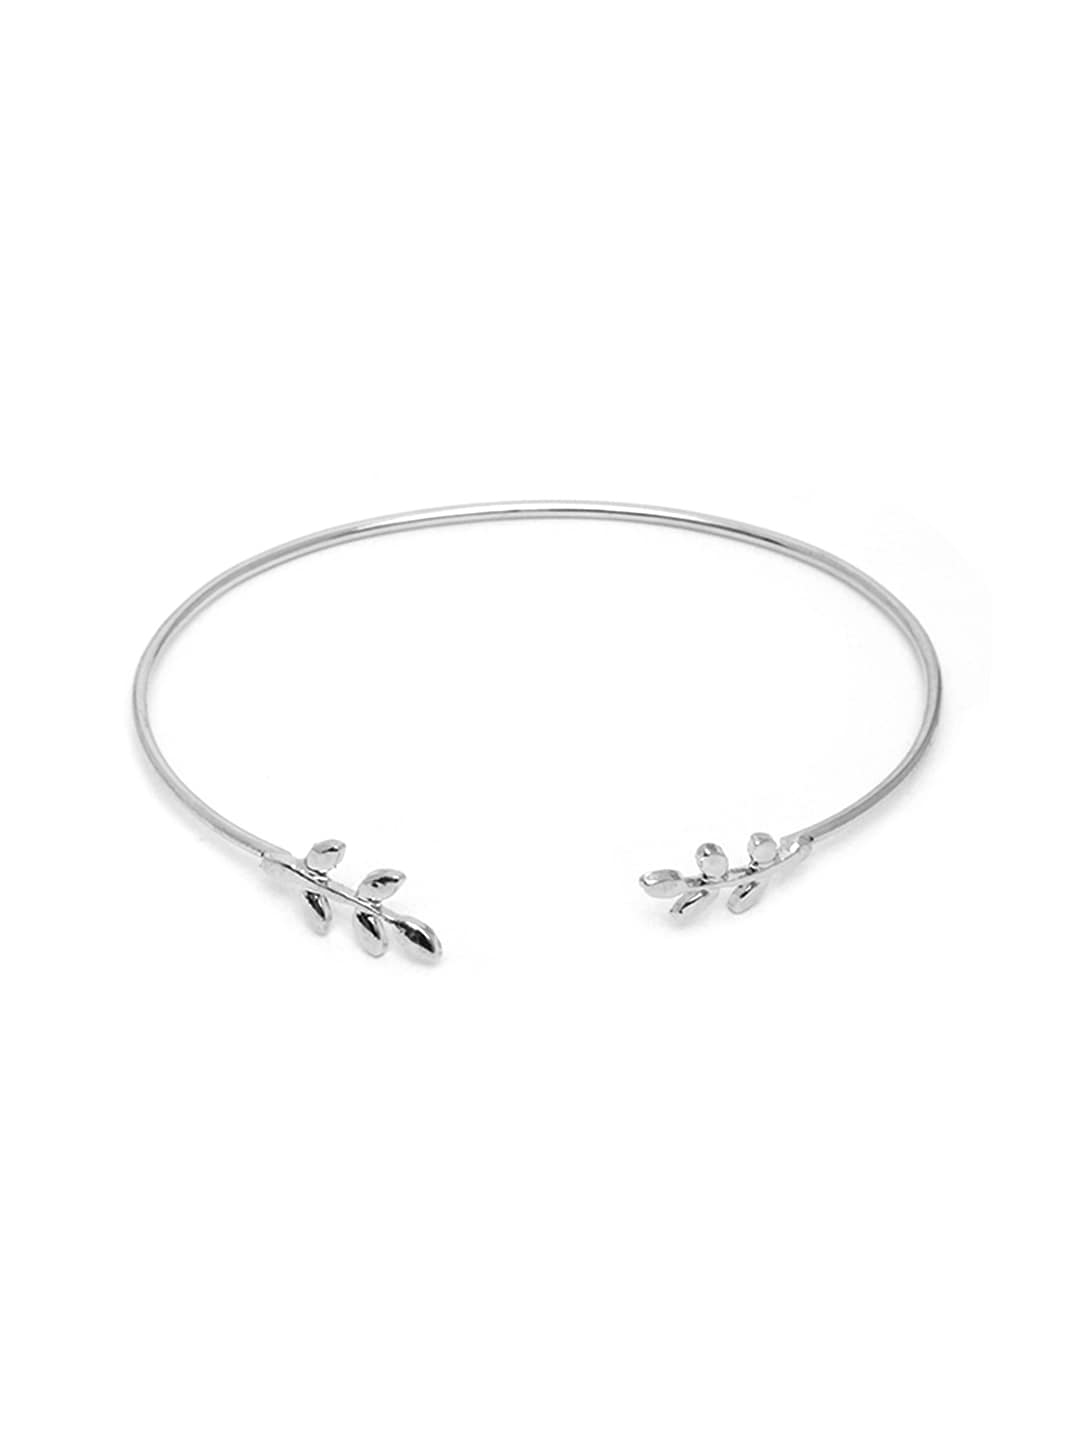 URBANIC Women Pack of 3 Silver-Toned Charm Bracelet Price in India